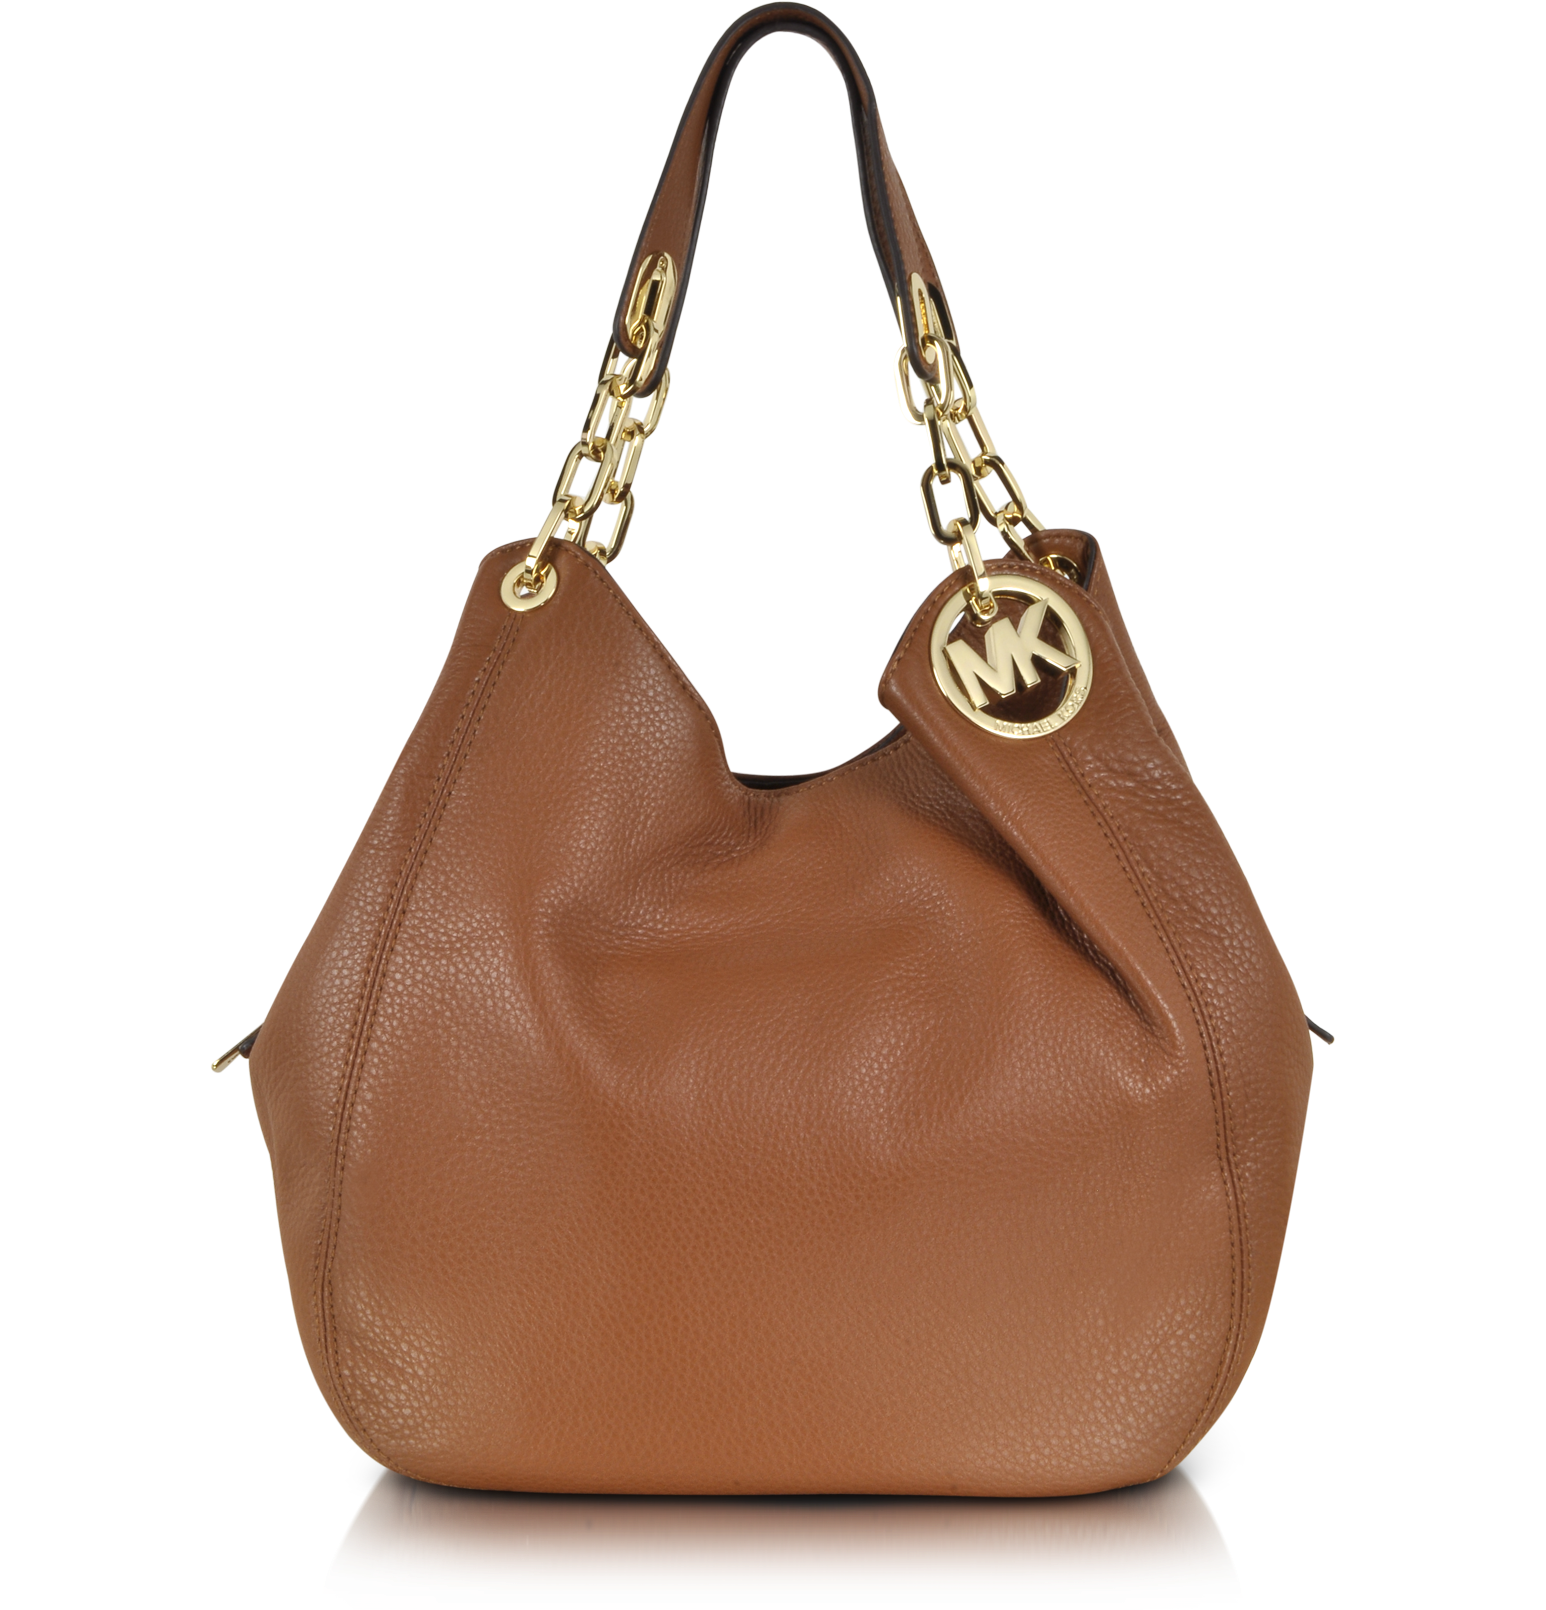 Michael Kors Fulton Luggage Leather Shoulder Tote at FORZIERI